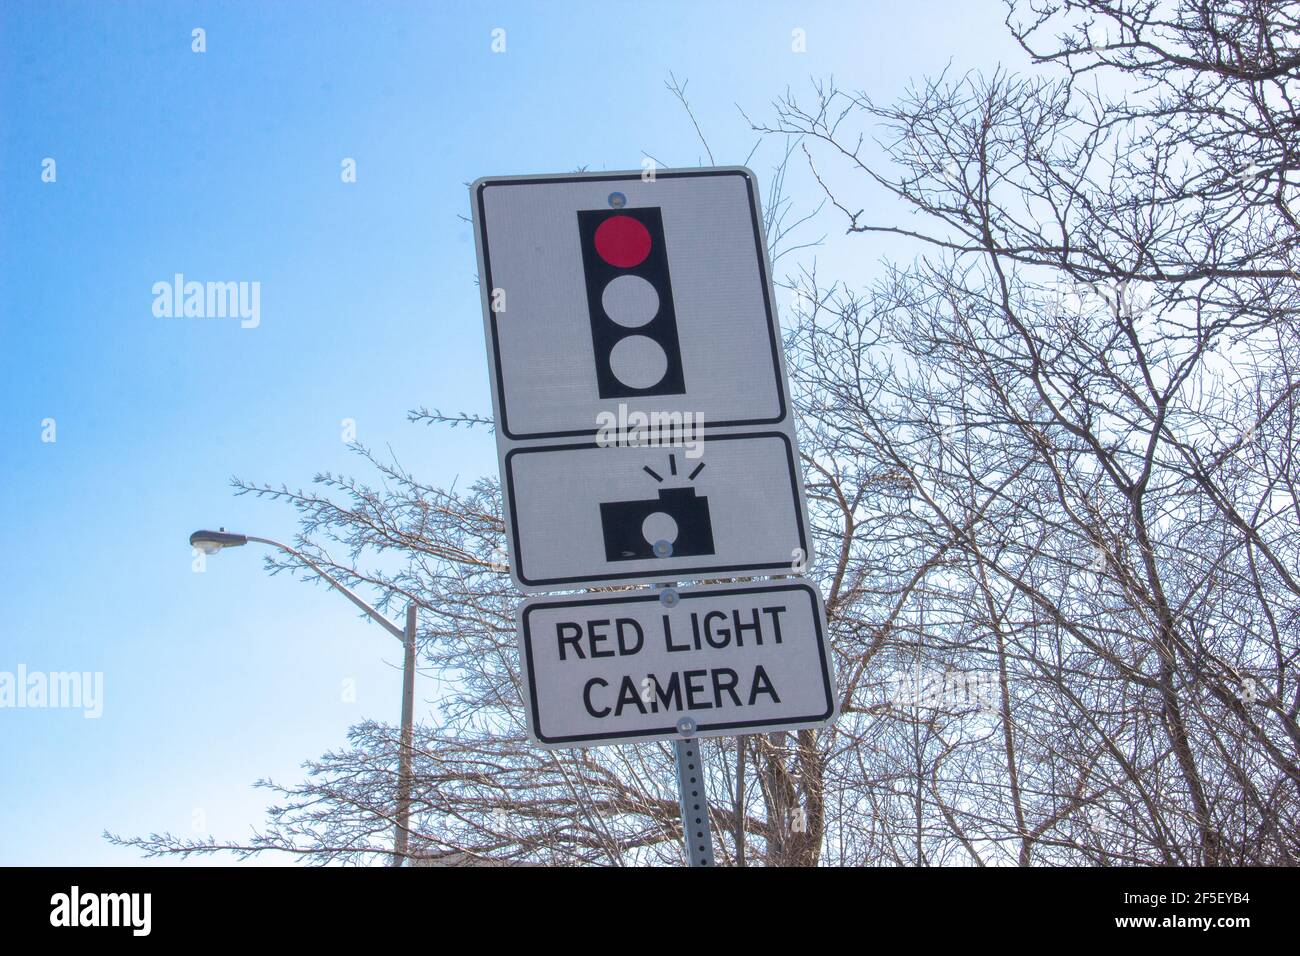 Red light camera sign Stock Photo